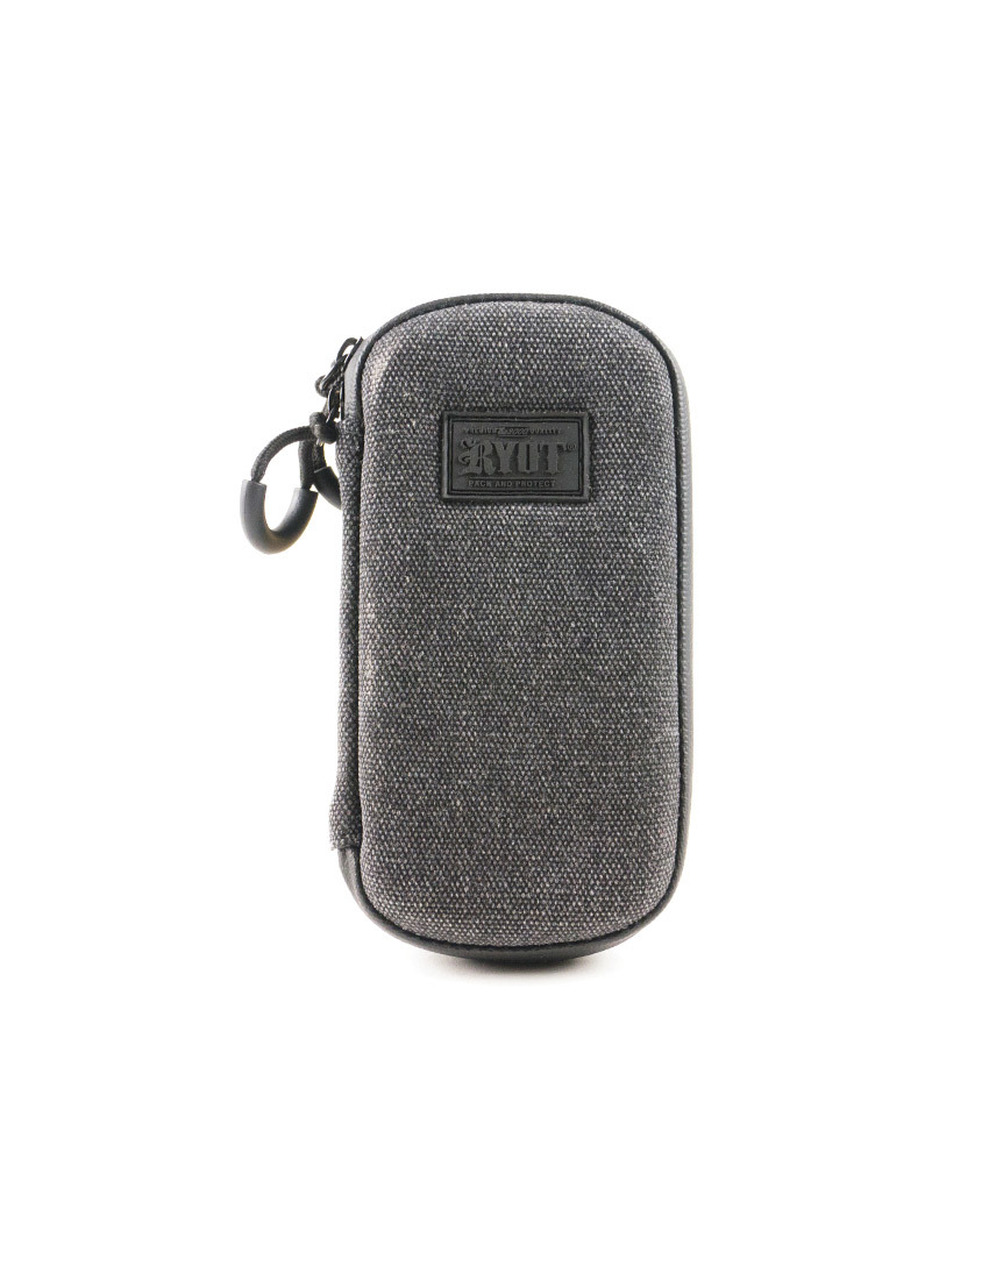 RYOT® Slym Case Carbon Series with SmellSafe™ and Lockable Technology